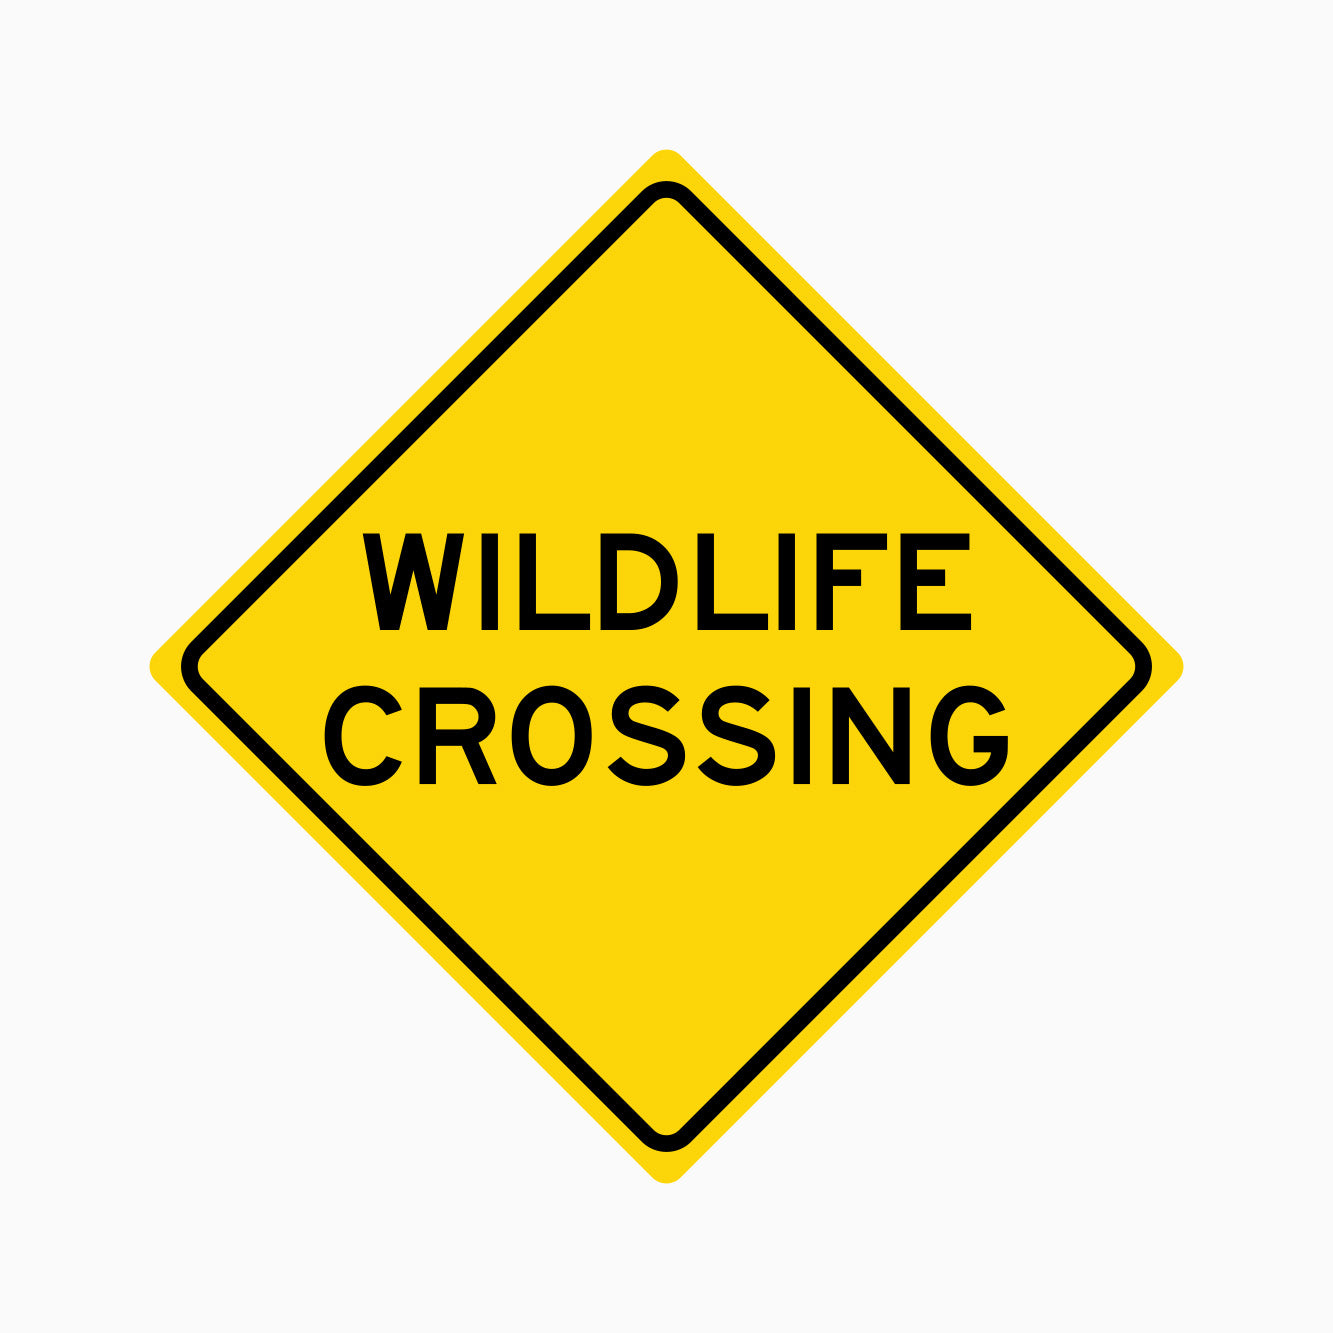 WILDLIFE CROSSING SIGN - GET SIGNS